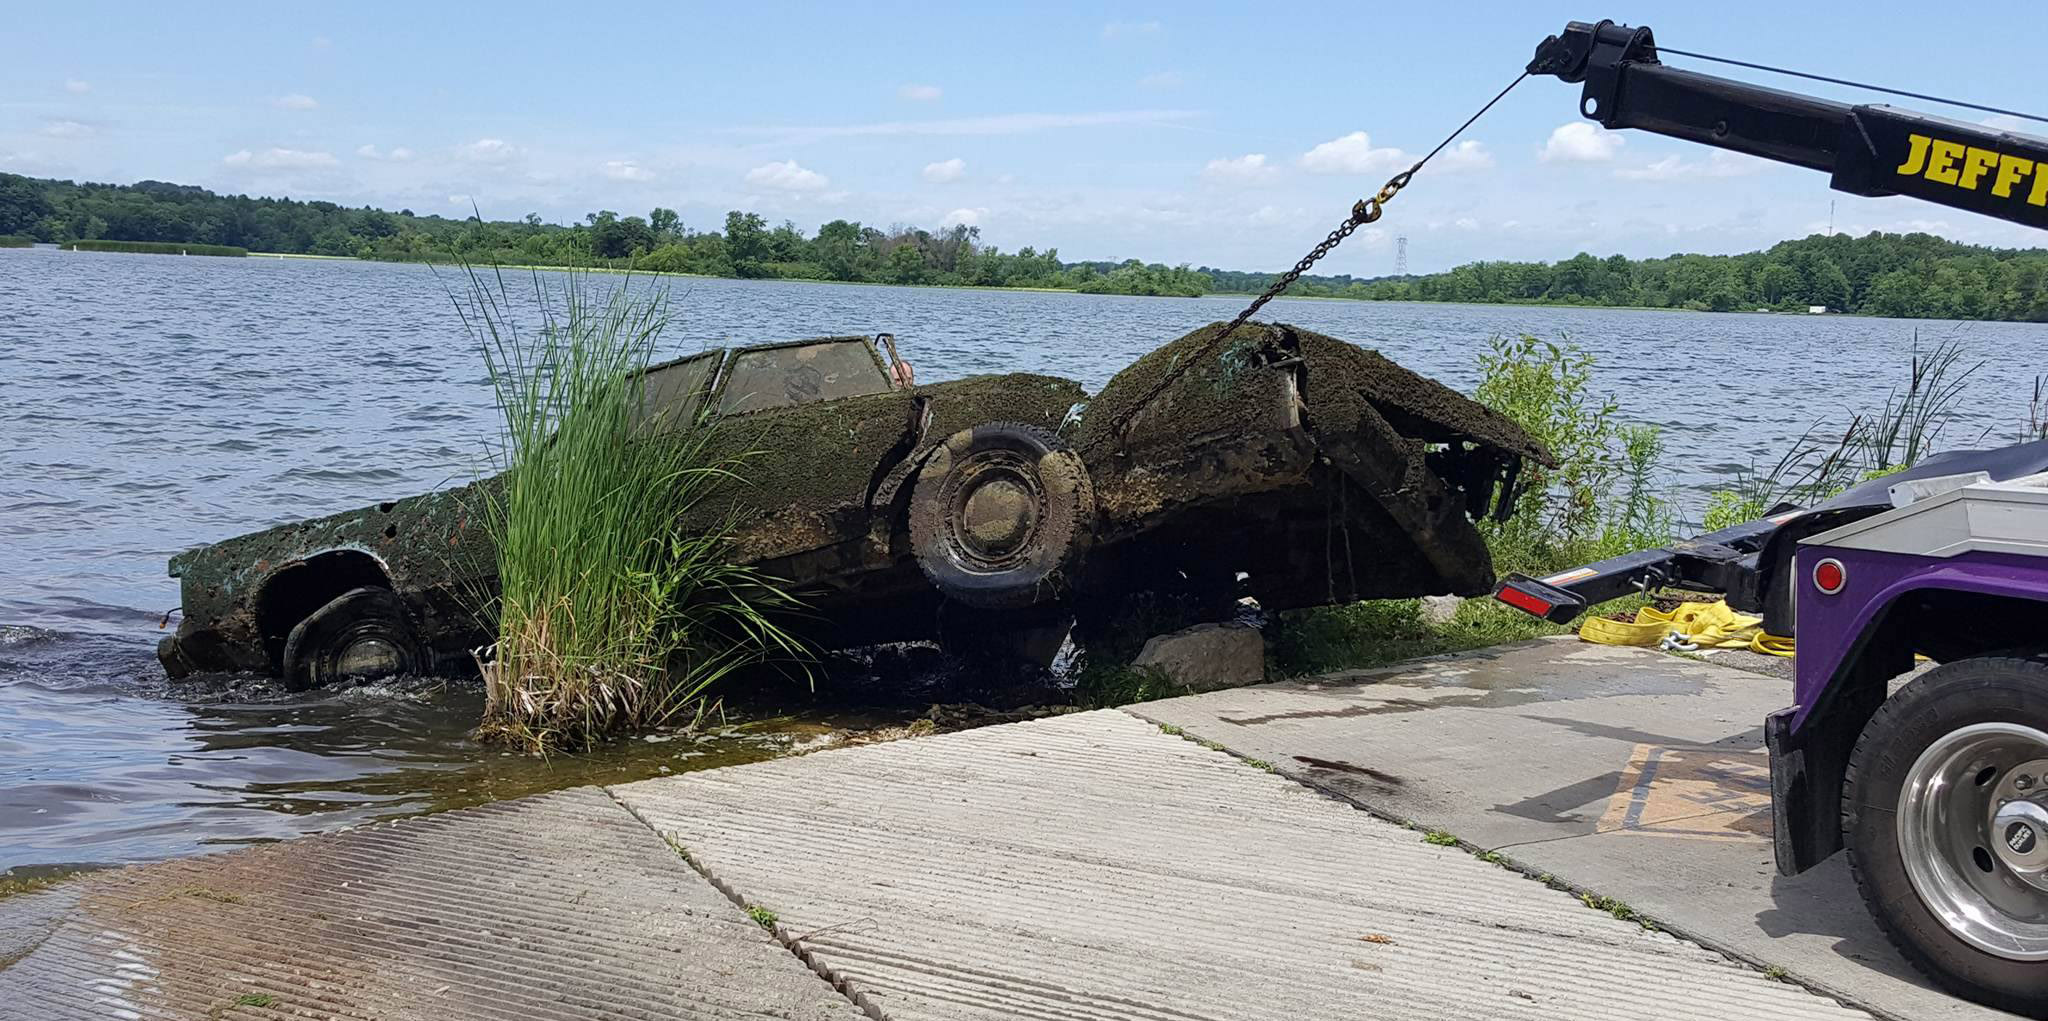 Tow truck pulls car out of lake - found with fishfinder by angler